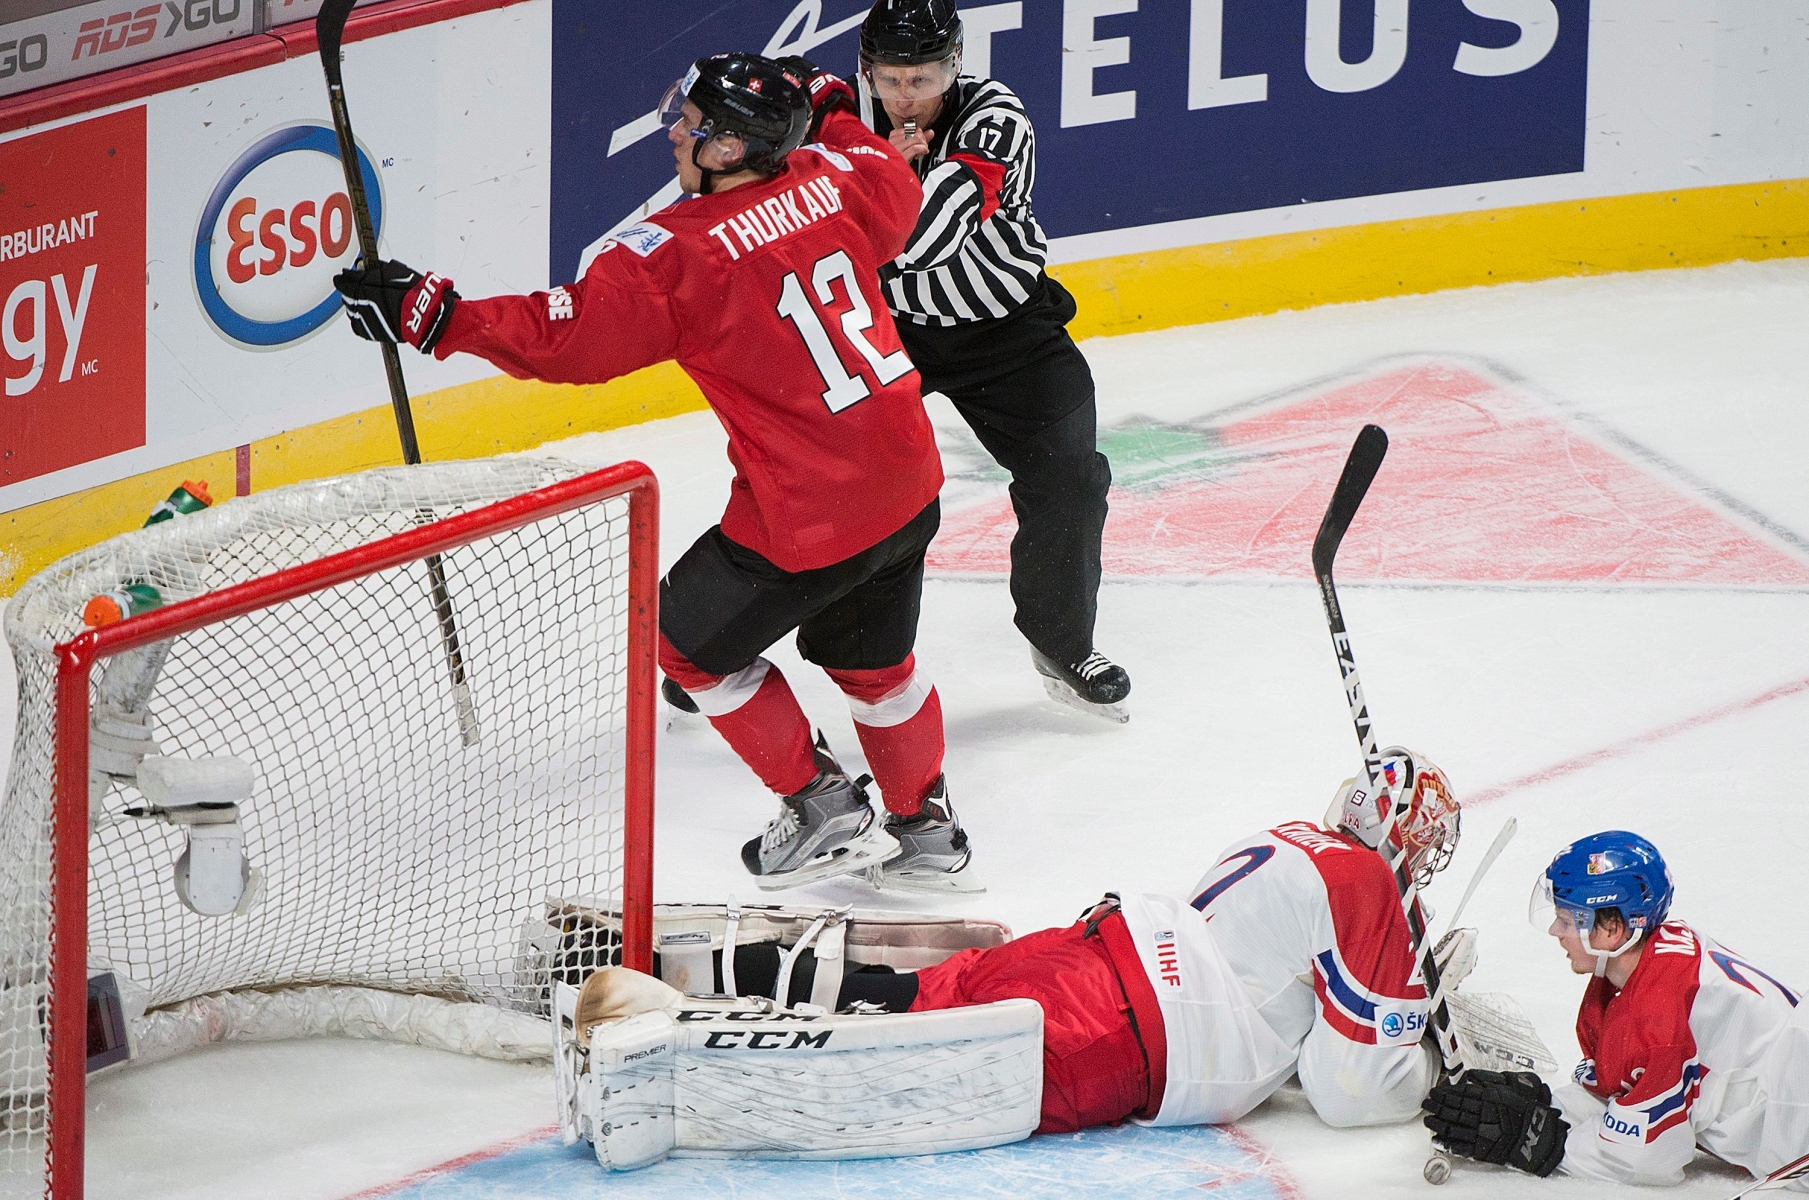 Czech Republic's goaltender Jakub Skarek and teammate David Kase, right, react after being scored on by Switzerland's Calvin Thurkauf (12) during second period preliminary round IIHF World Junior Championship hockey action in Montreal, Tuesday, Dec. 27, 2016. (Graham Hughes/The Canadian Press via AP) HKO World Juniors Switzerland Czech Republic